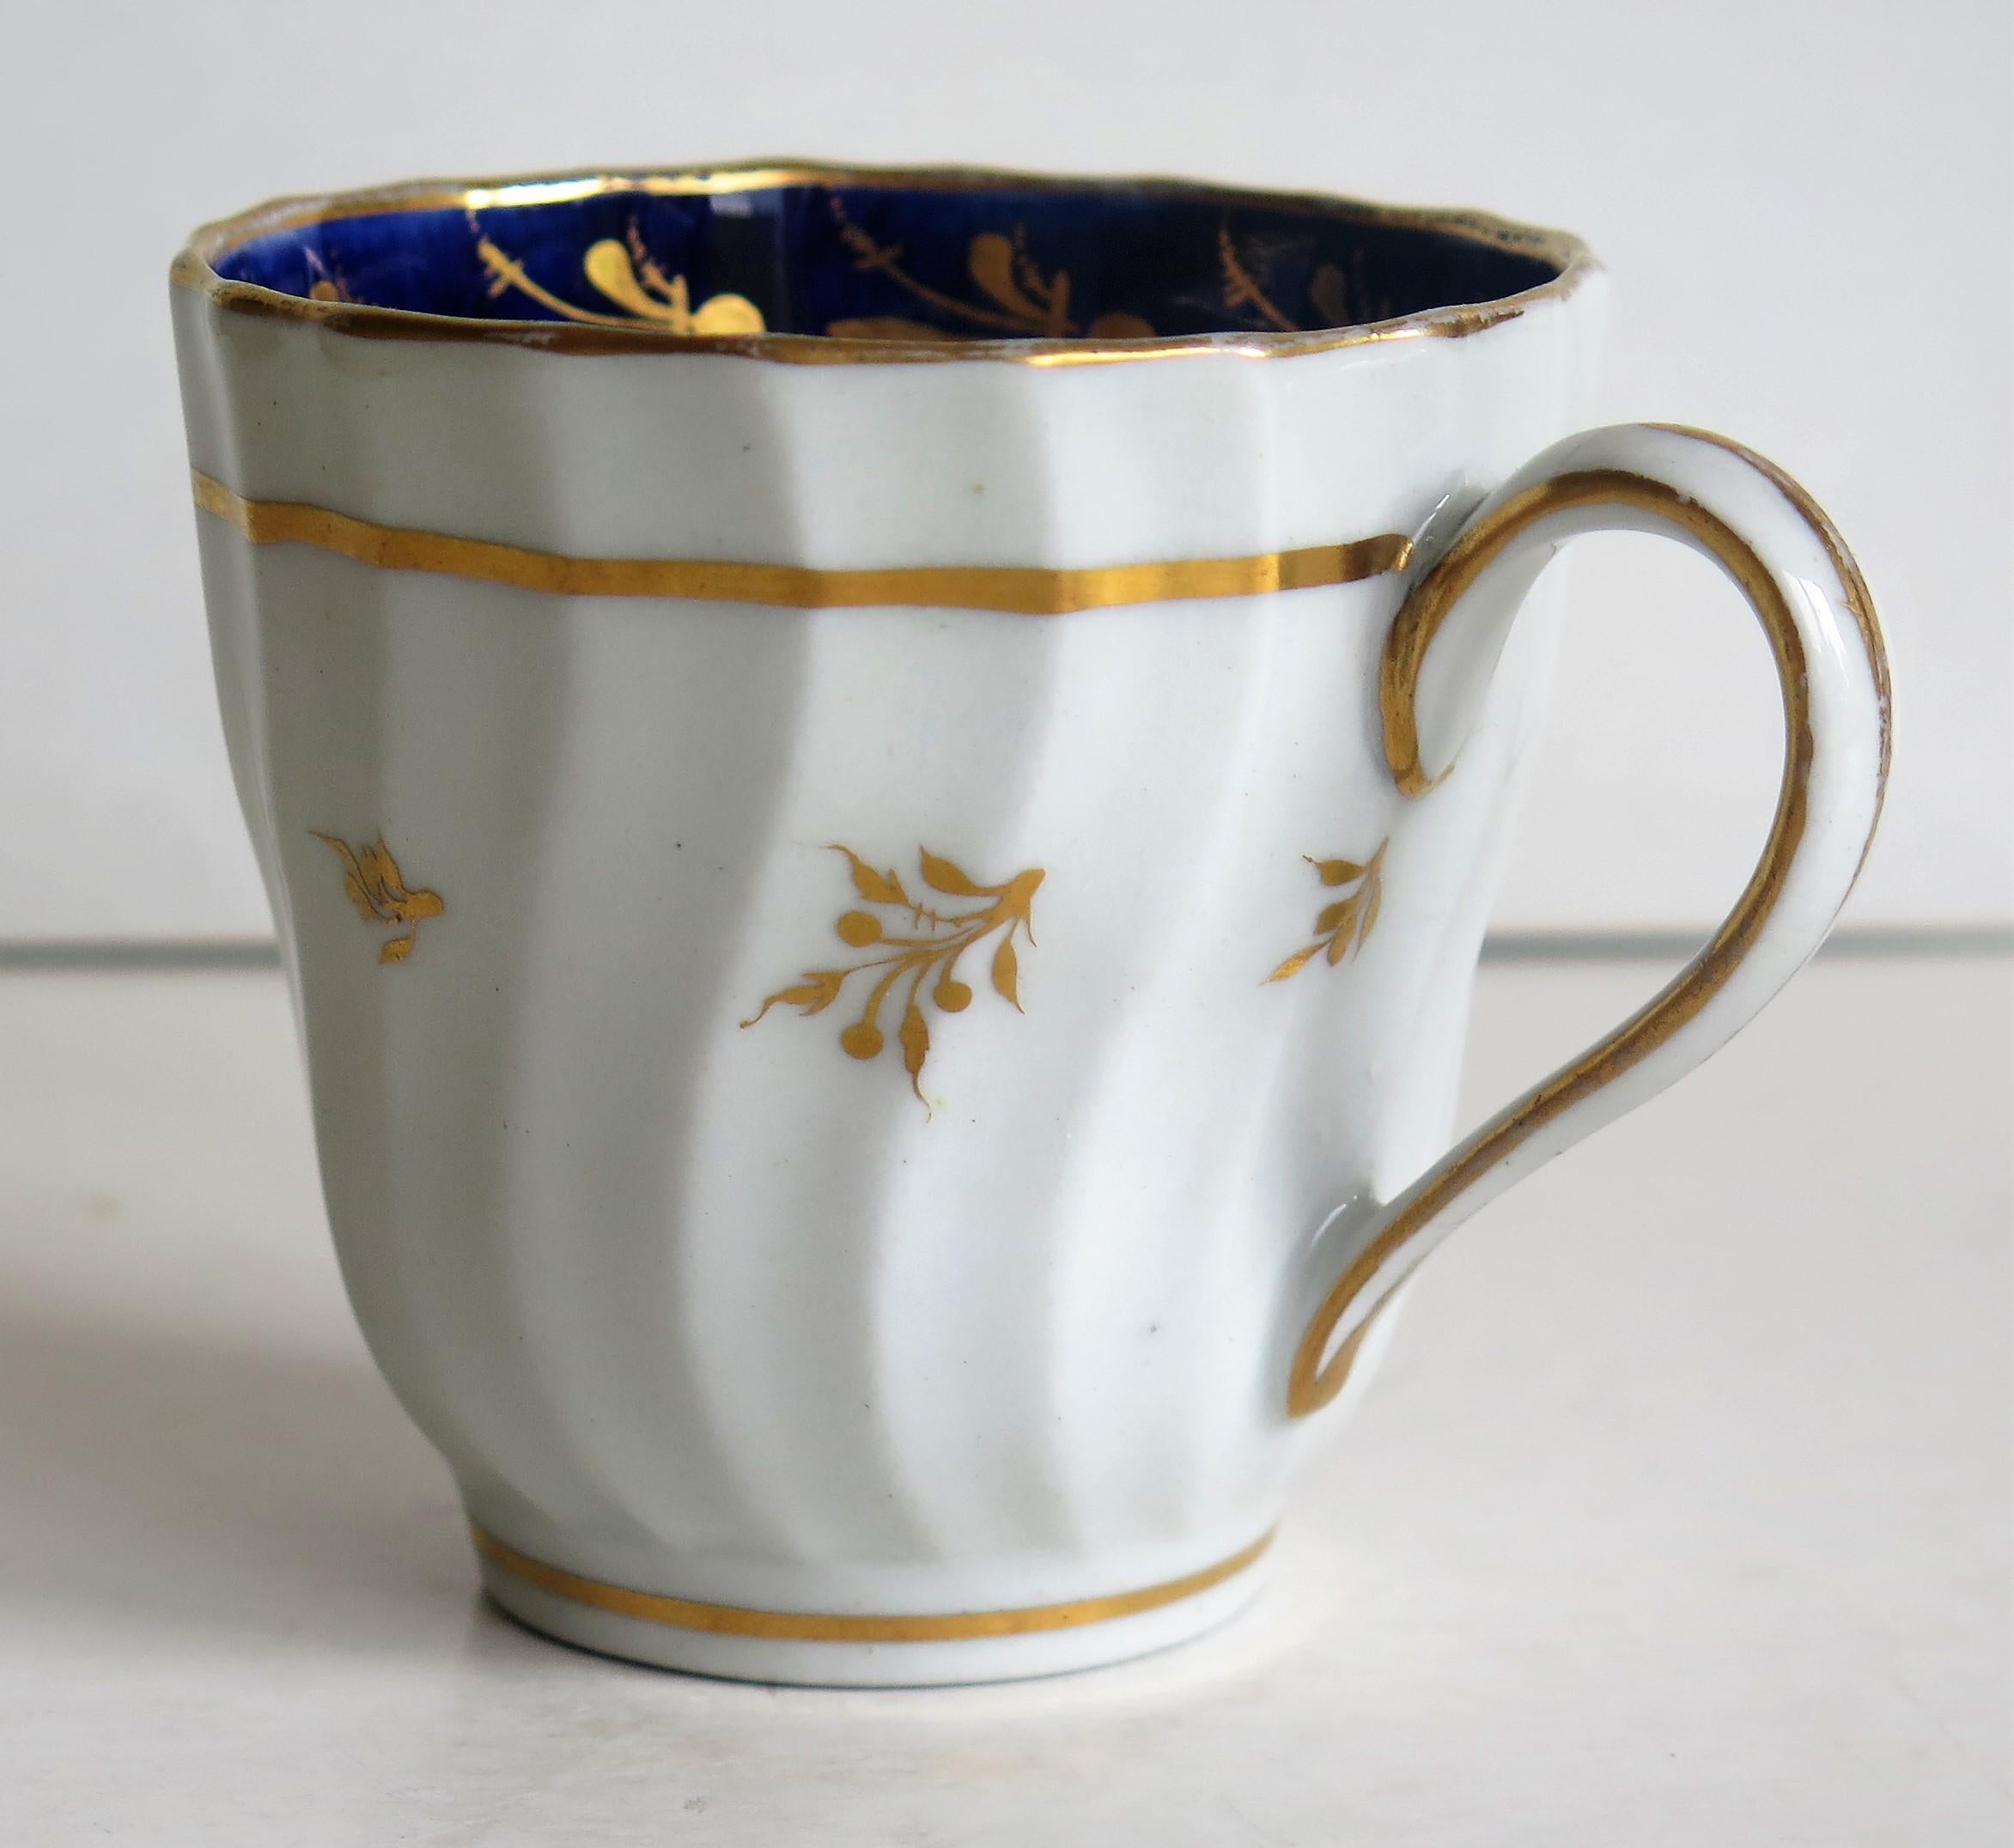 New Hall Porcelain Coffee Cup Shanked and Fluted Body Hand-Painted, circa 1795 5